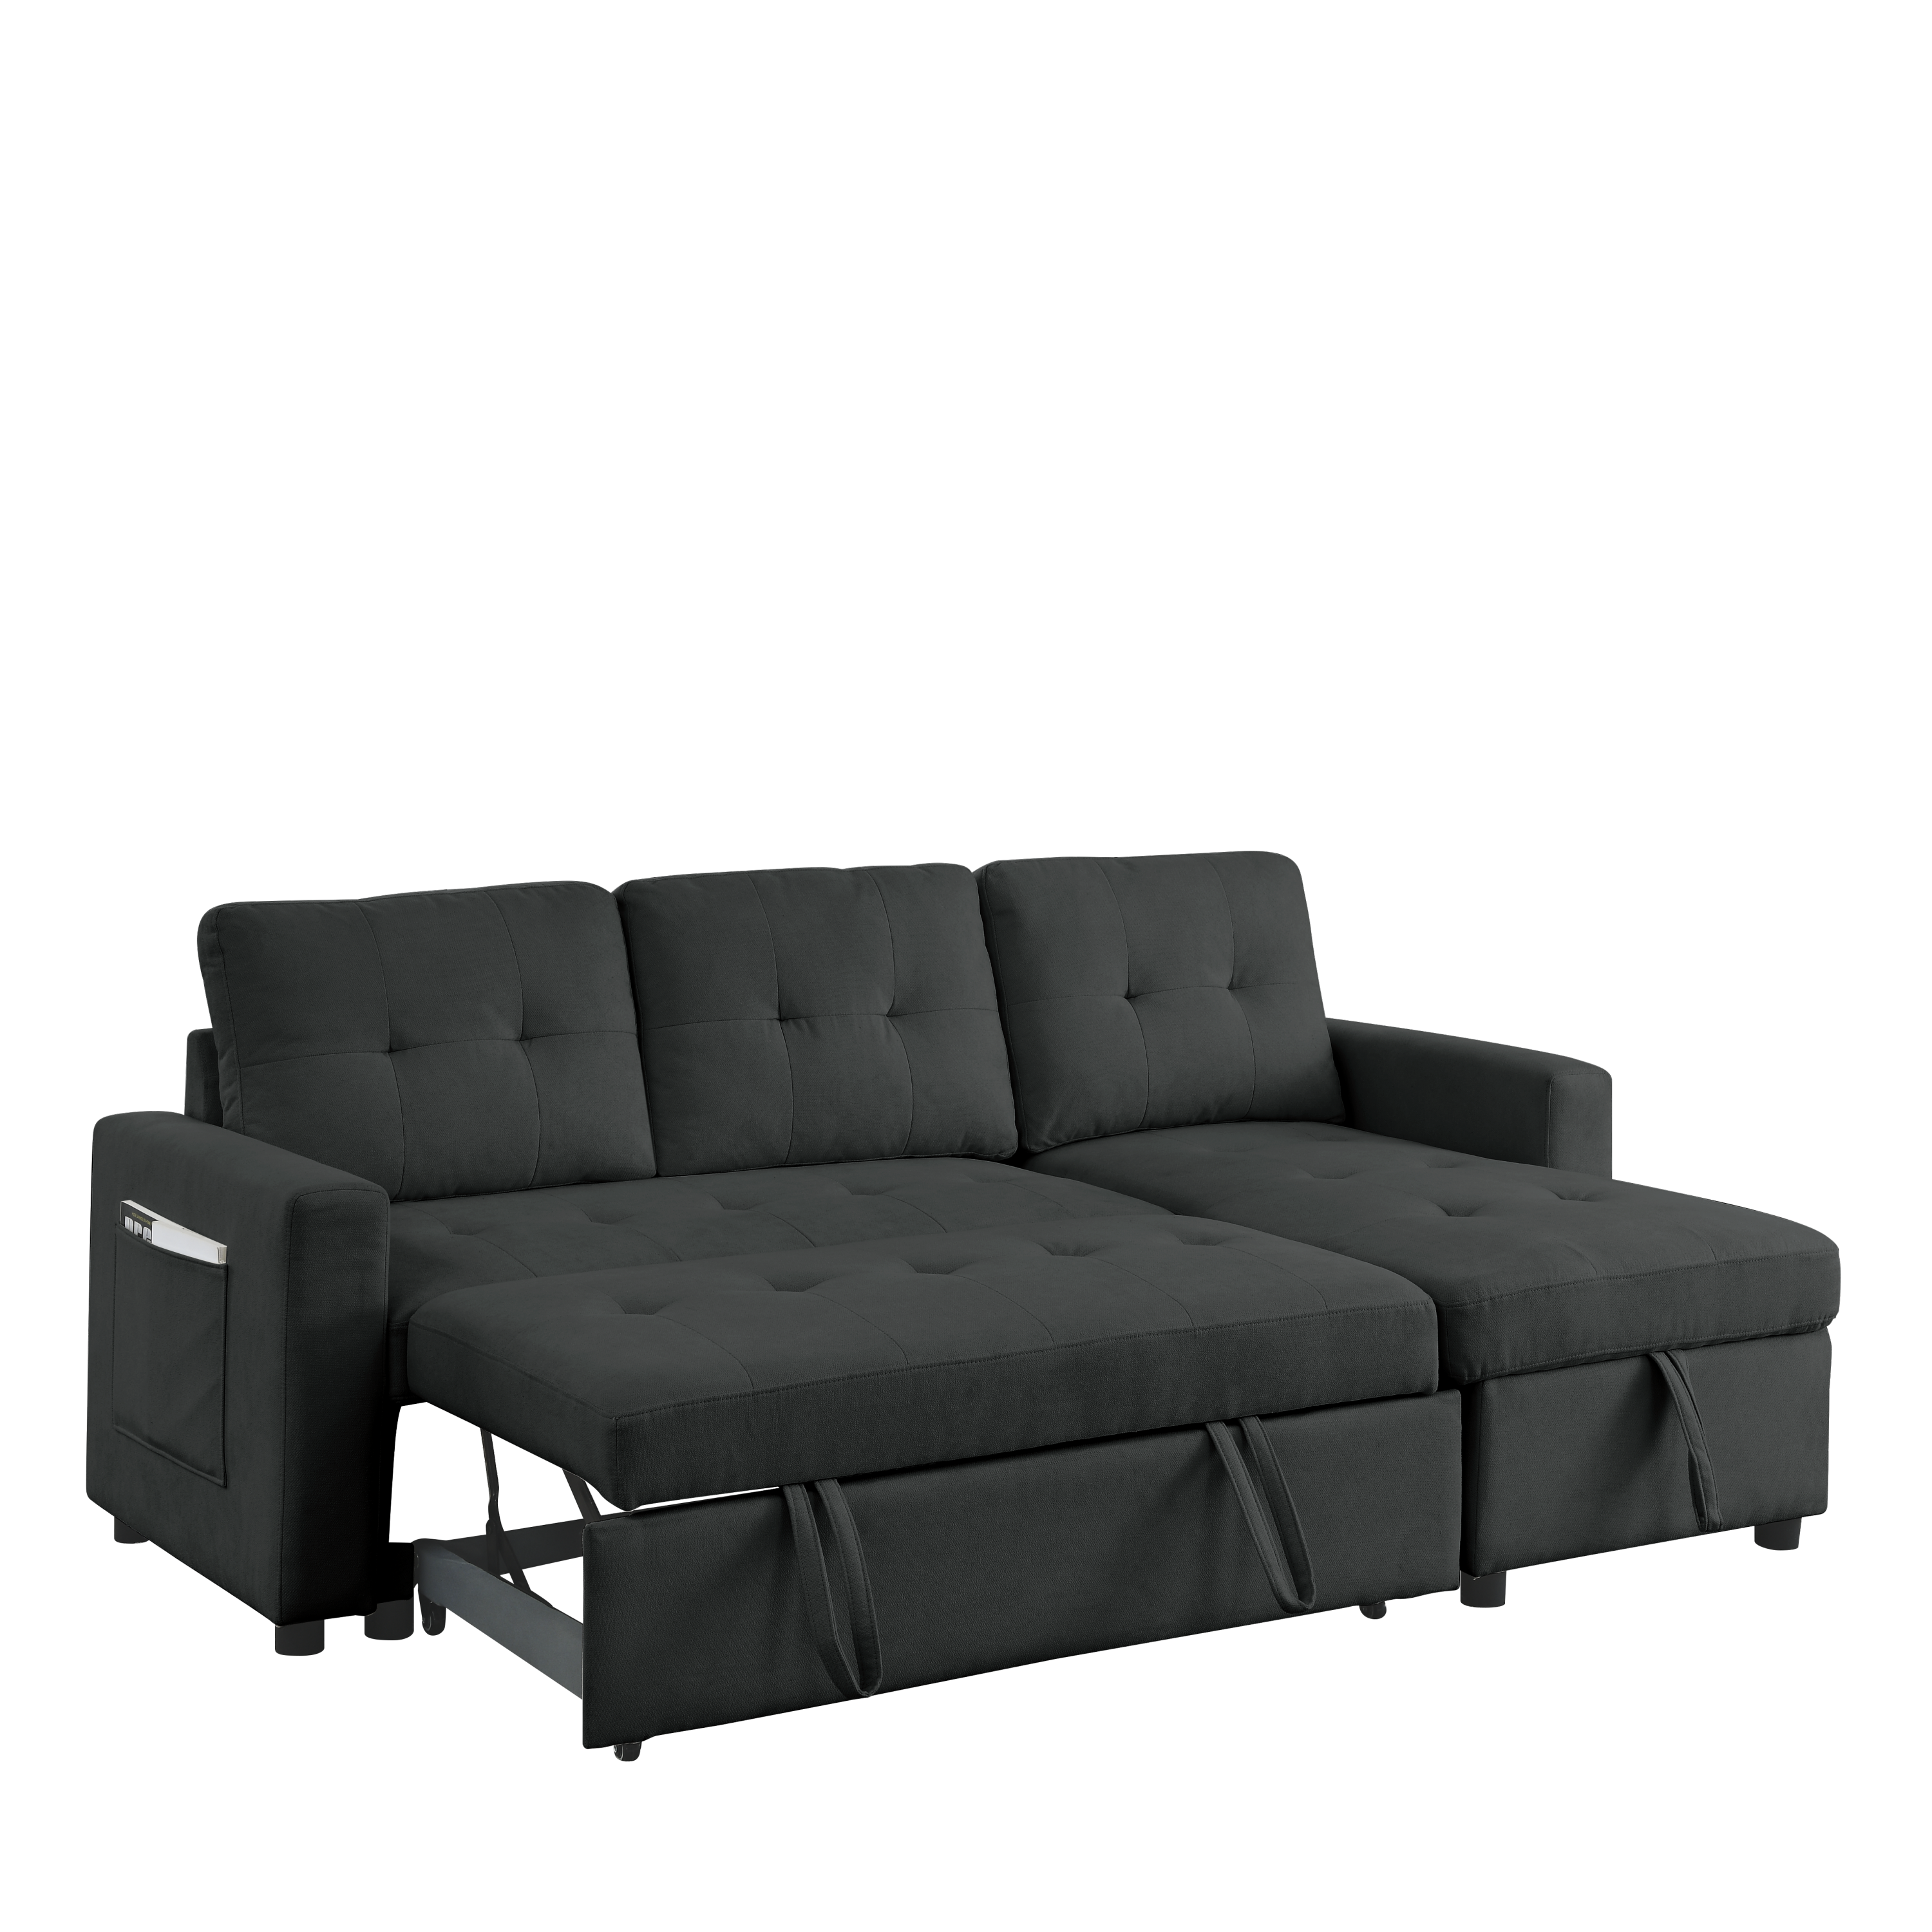 78.5" Sleeper Sectional Sofa w/ Storage - Reversible-Sleeper Sectionals-American Furniture Outlet